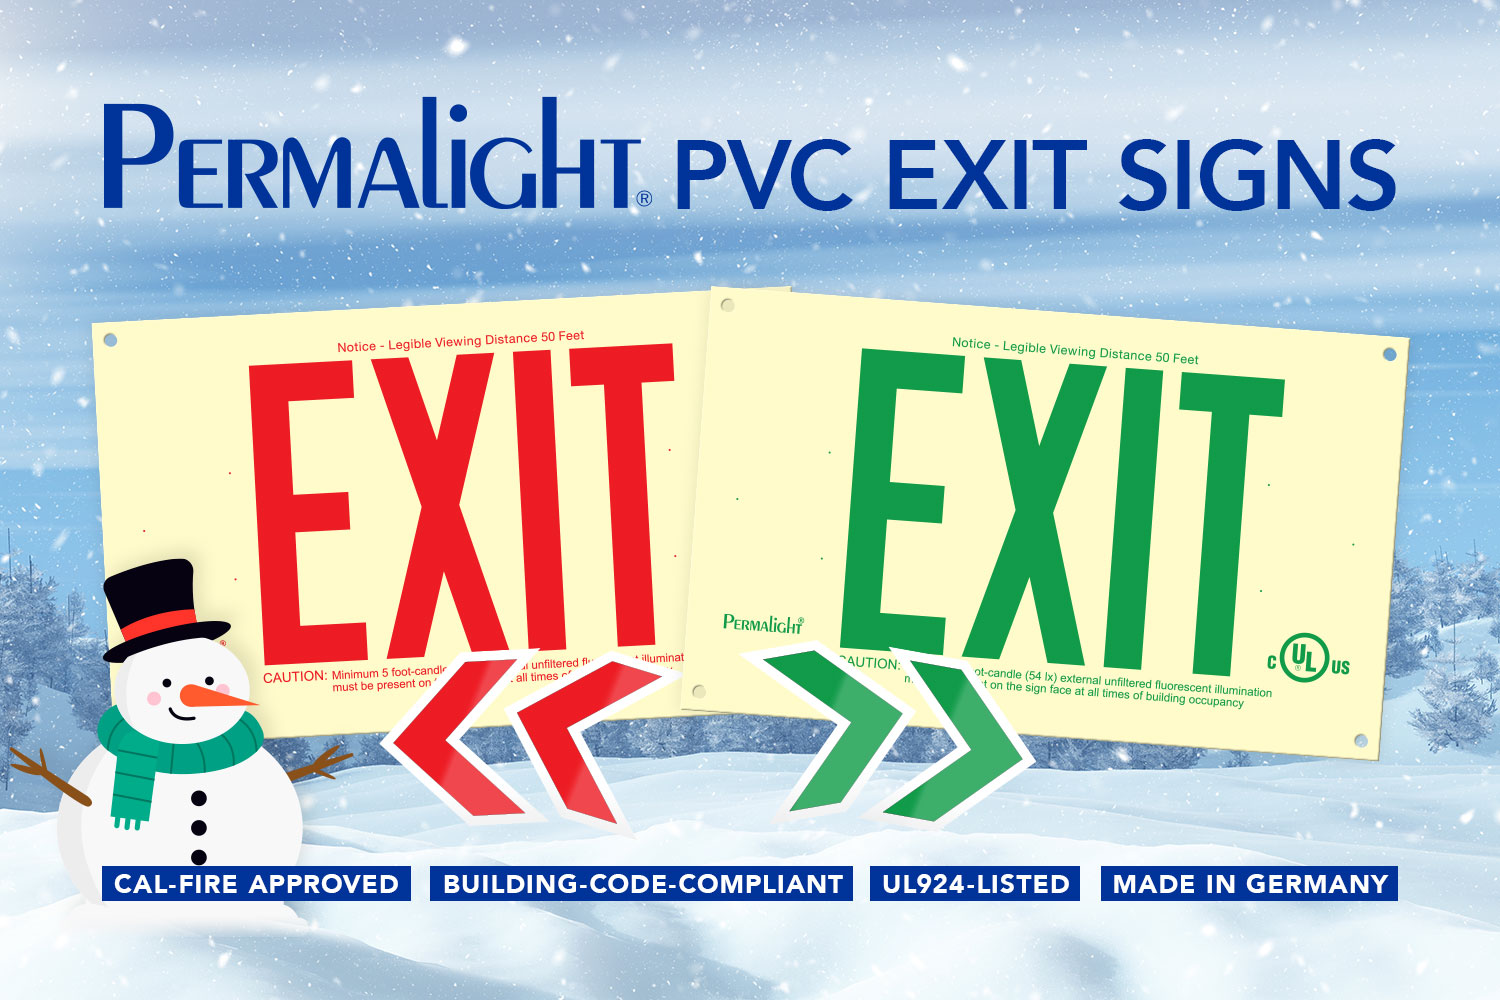 Customizable & Code-Compliant - PERMALIGHT® Exit Signs